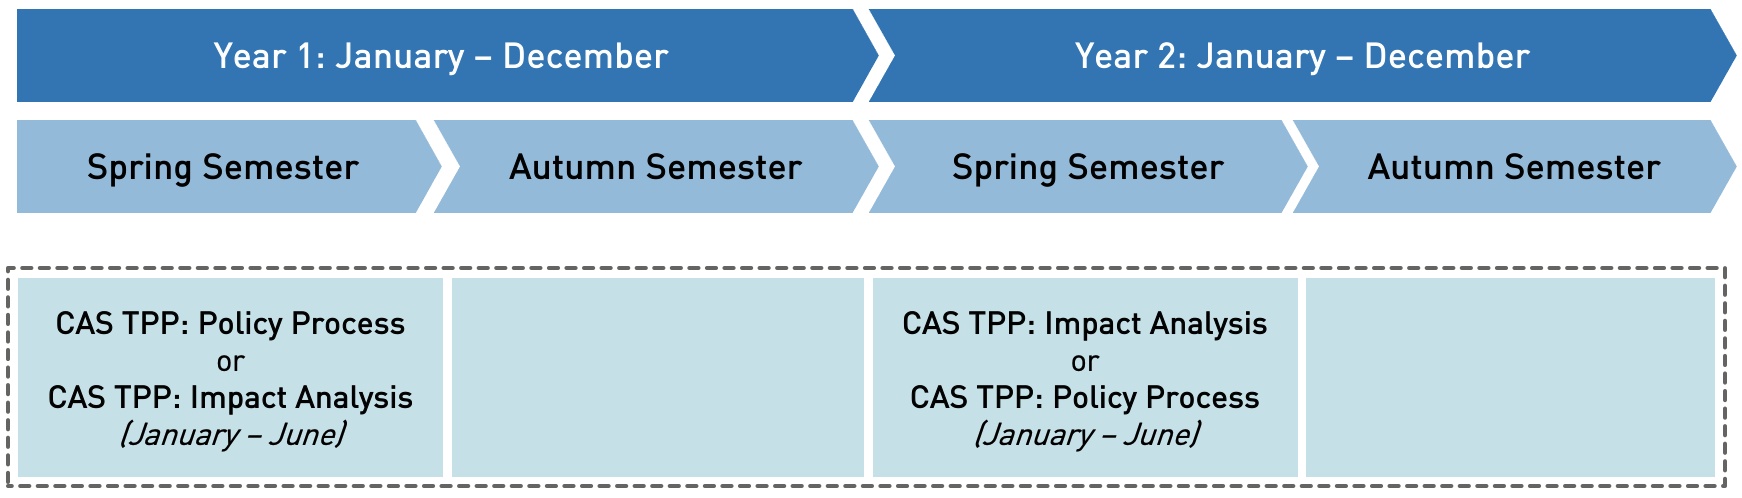 Schedule when both CAS TPP degrees are combined